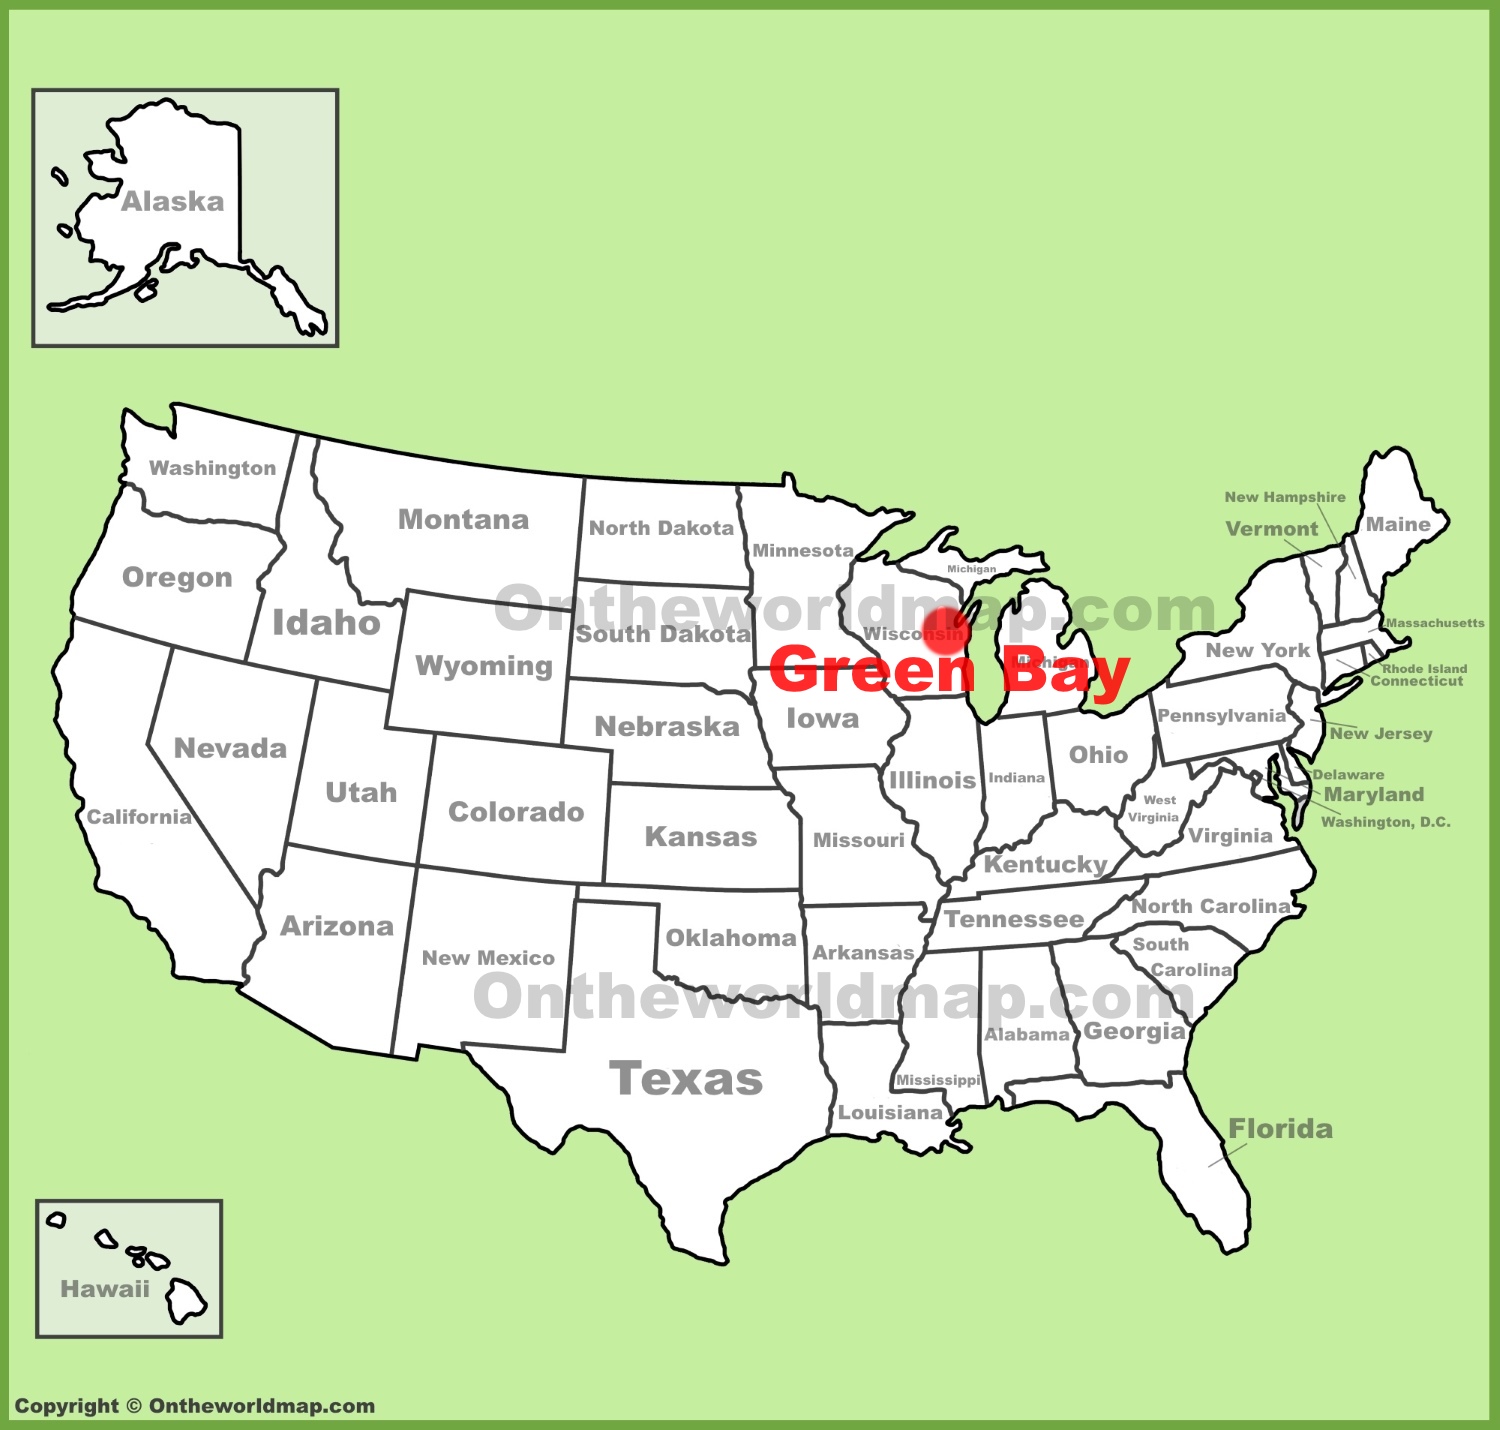 Green Bay location on the U.S. Map